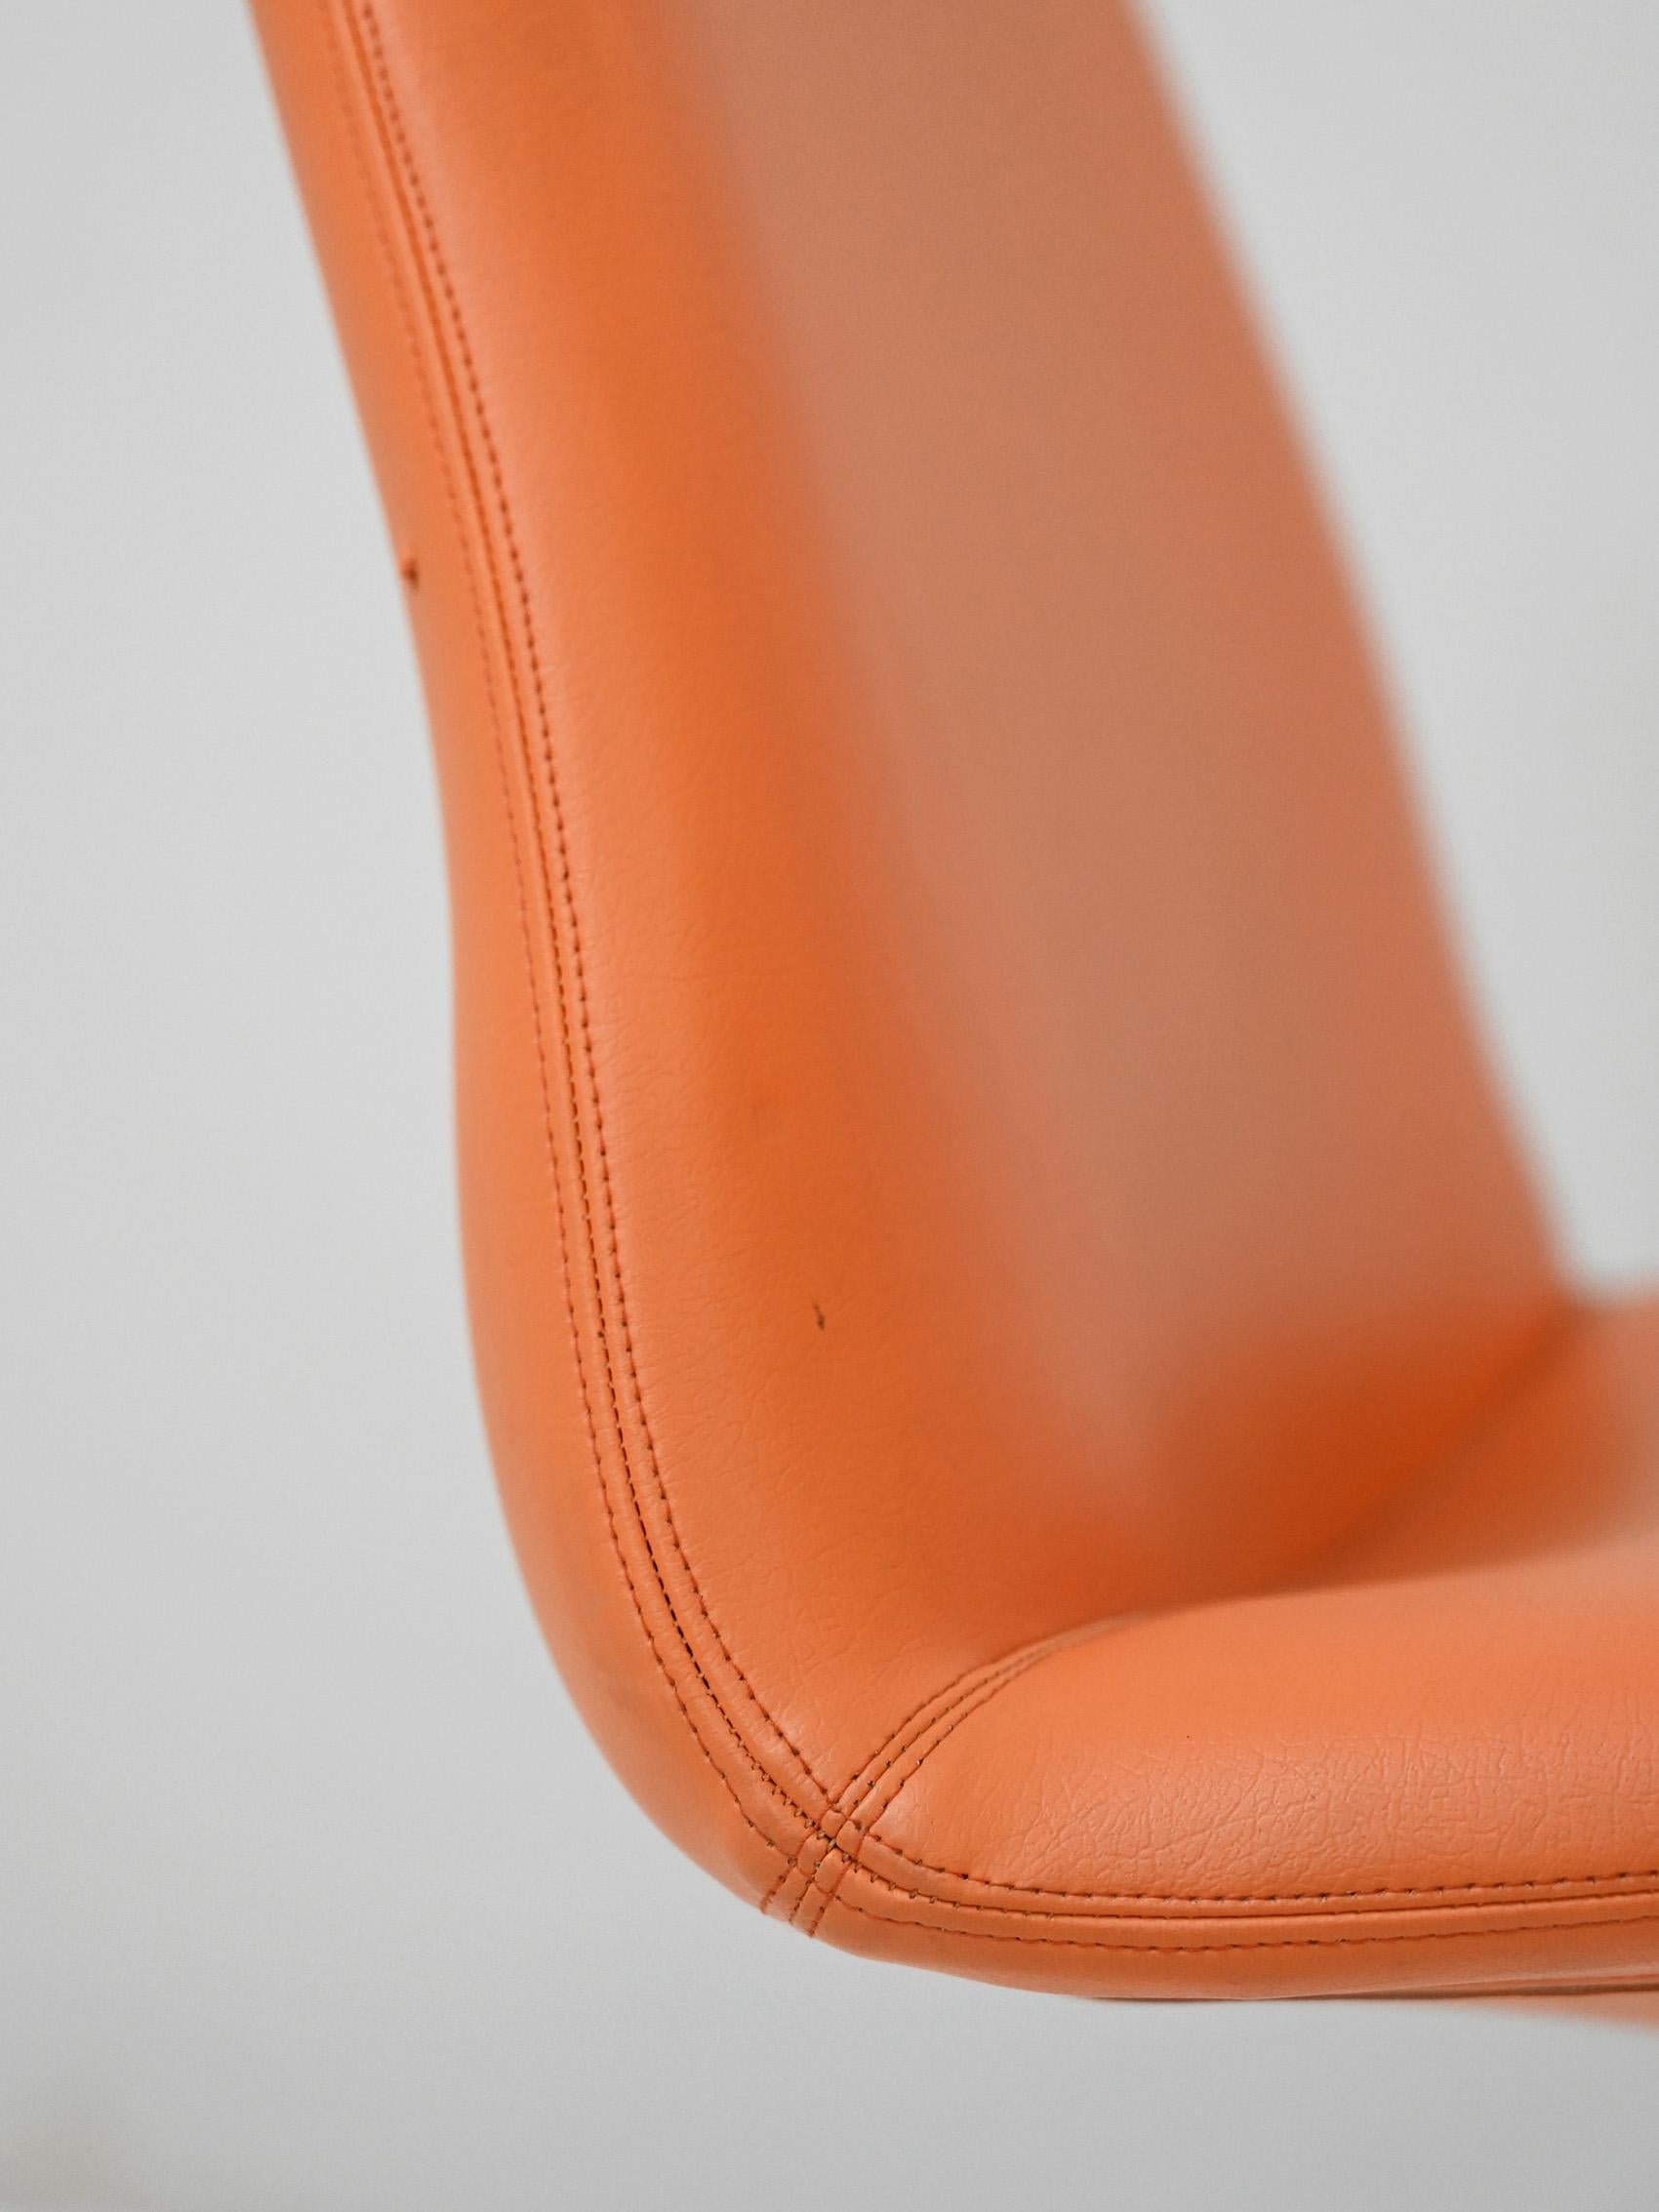 Metal 'Spaceage' style swivel chairs orange color, 1970s For Sale